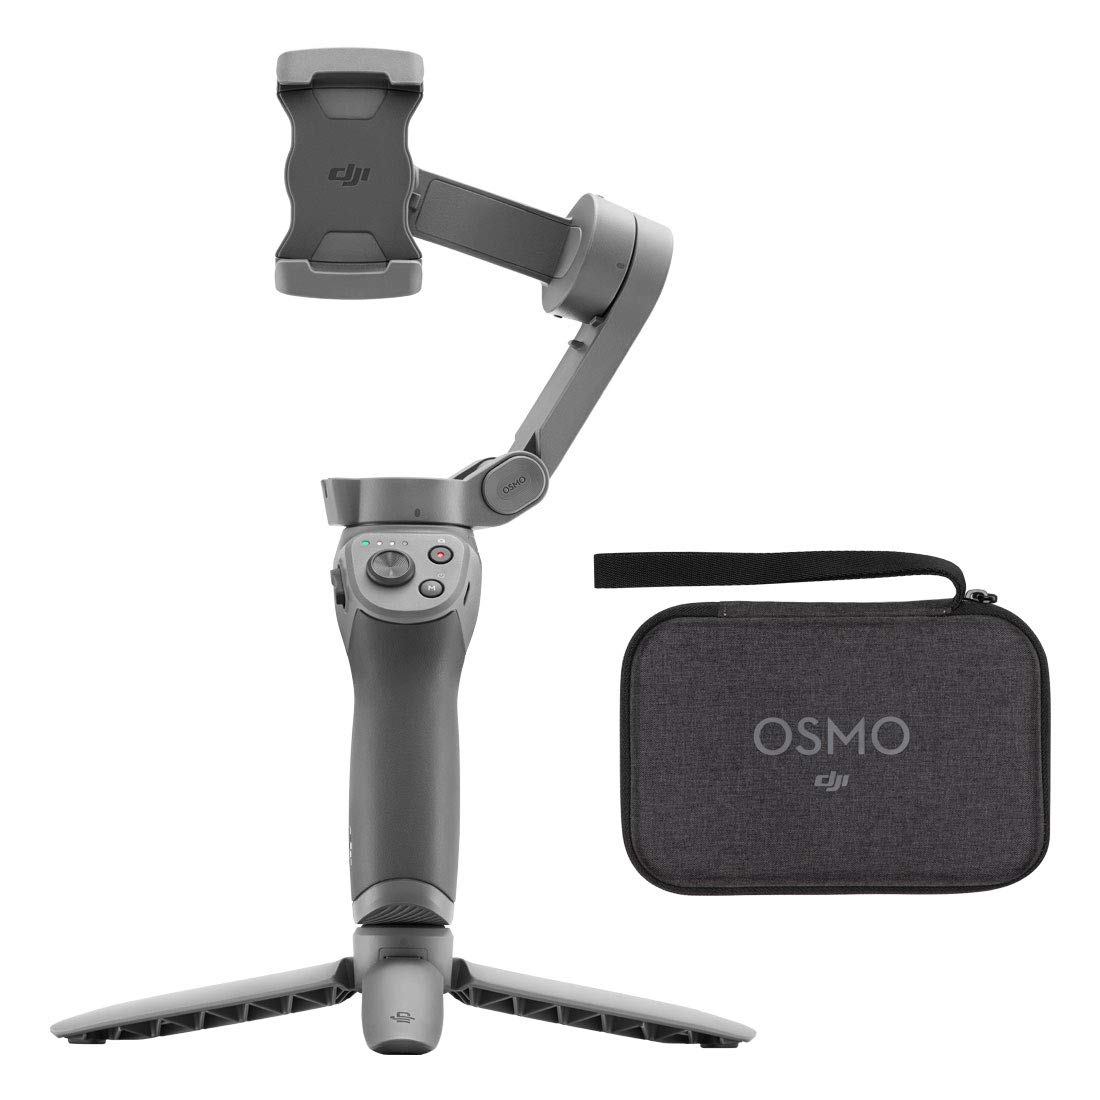 DJI Osmo Mobile 3 Combo - 3-Axis Smartphone Gimbal Handheld Stabilizer Vlog Youtuber Live Video for iPhone Android